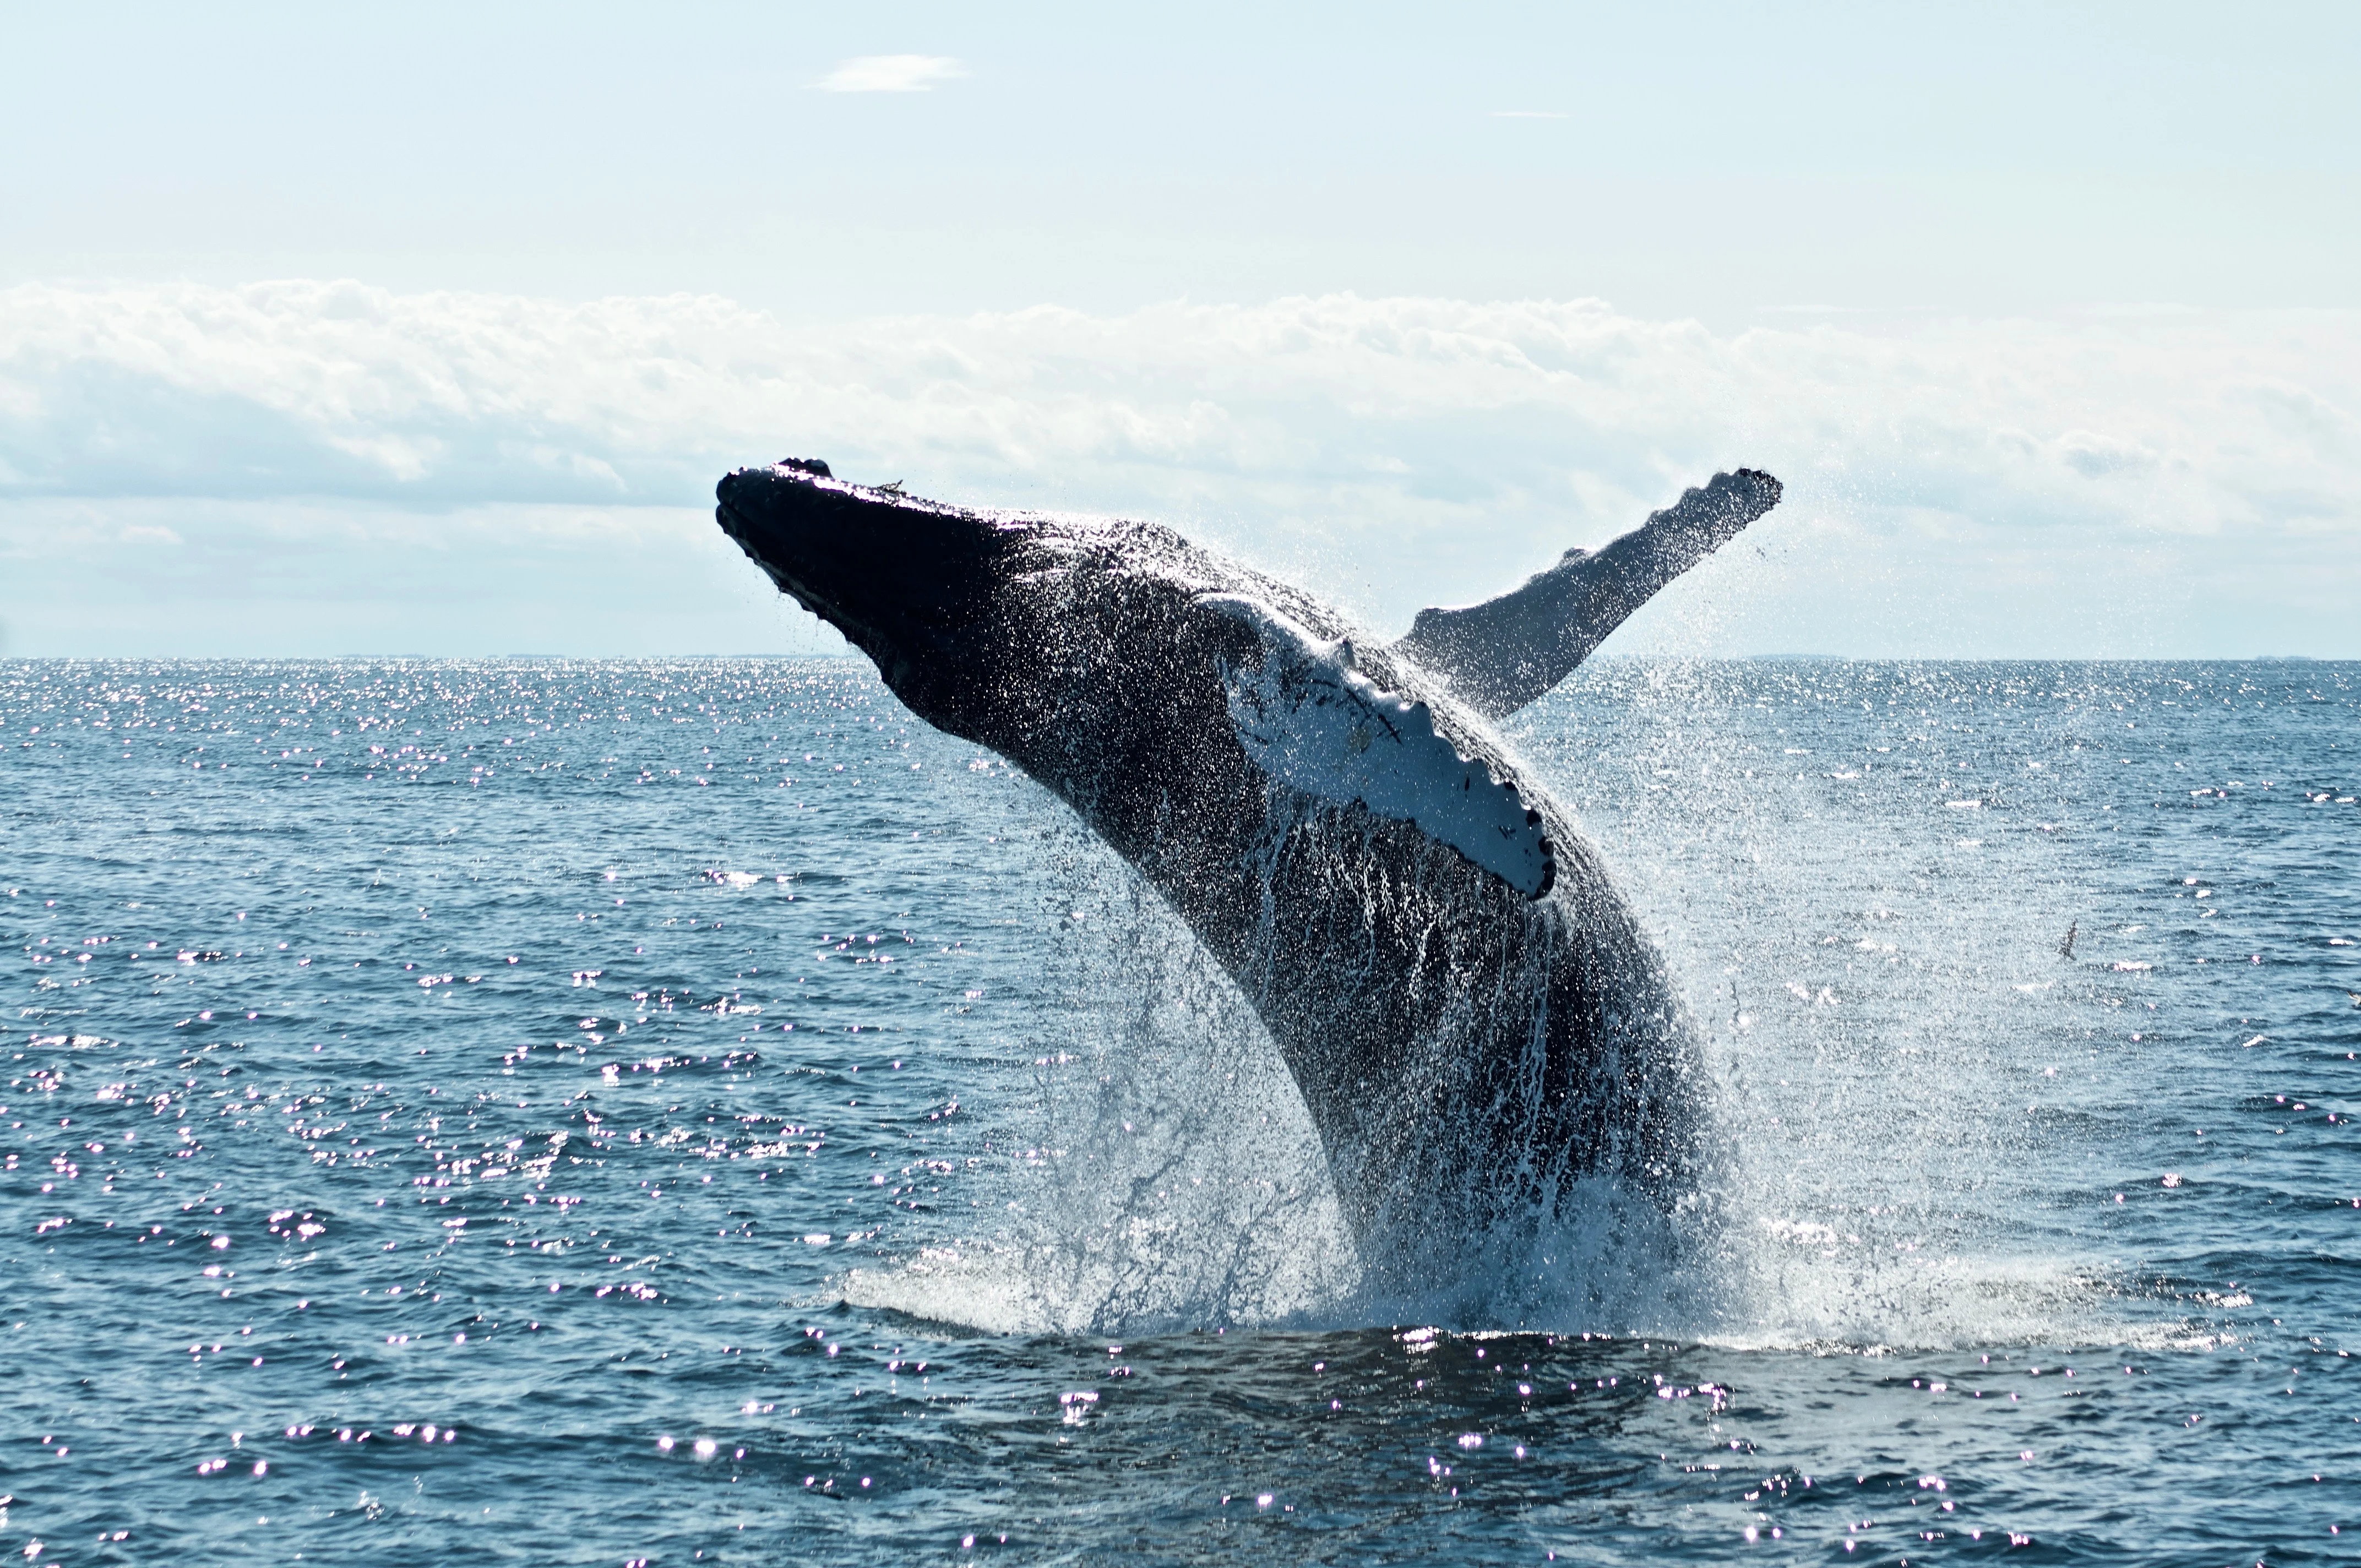 whale breaching from the ocean which is one of the most epic Maui Tours